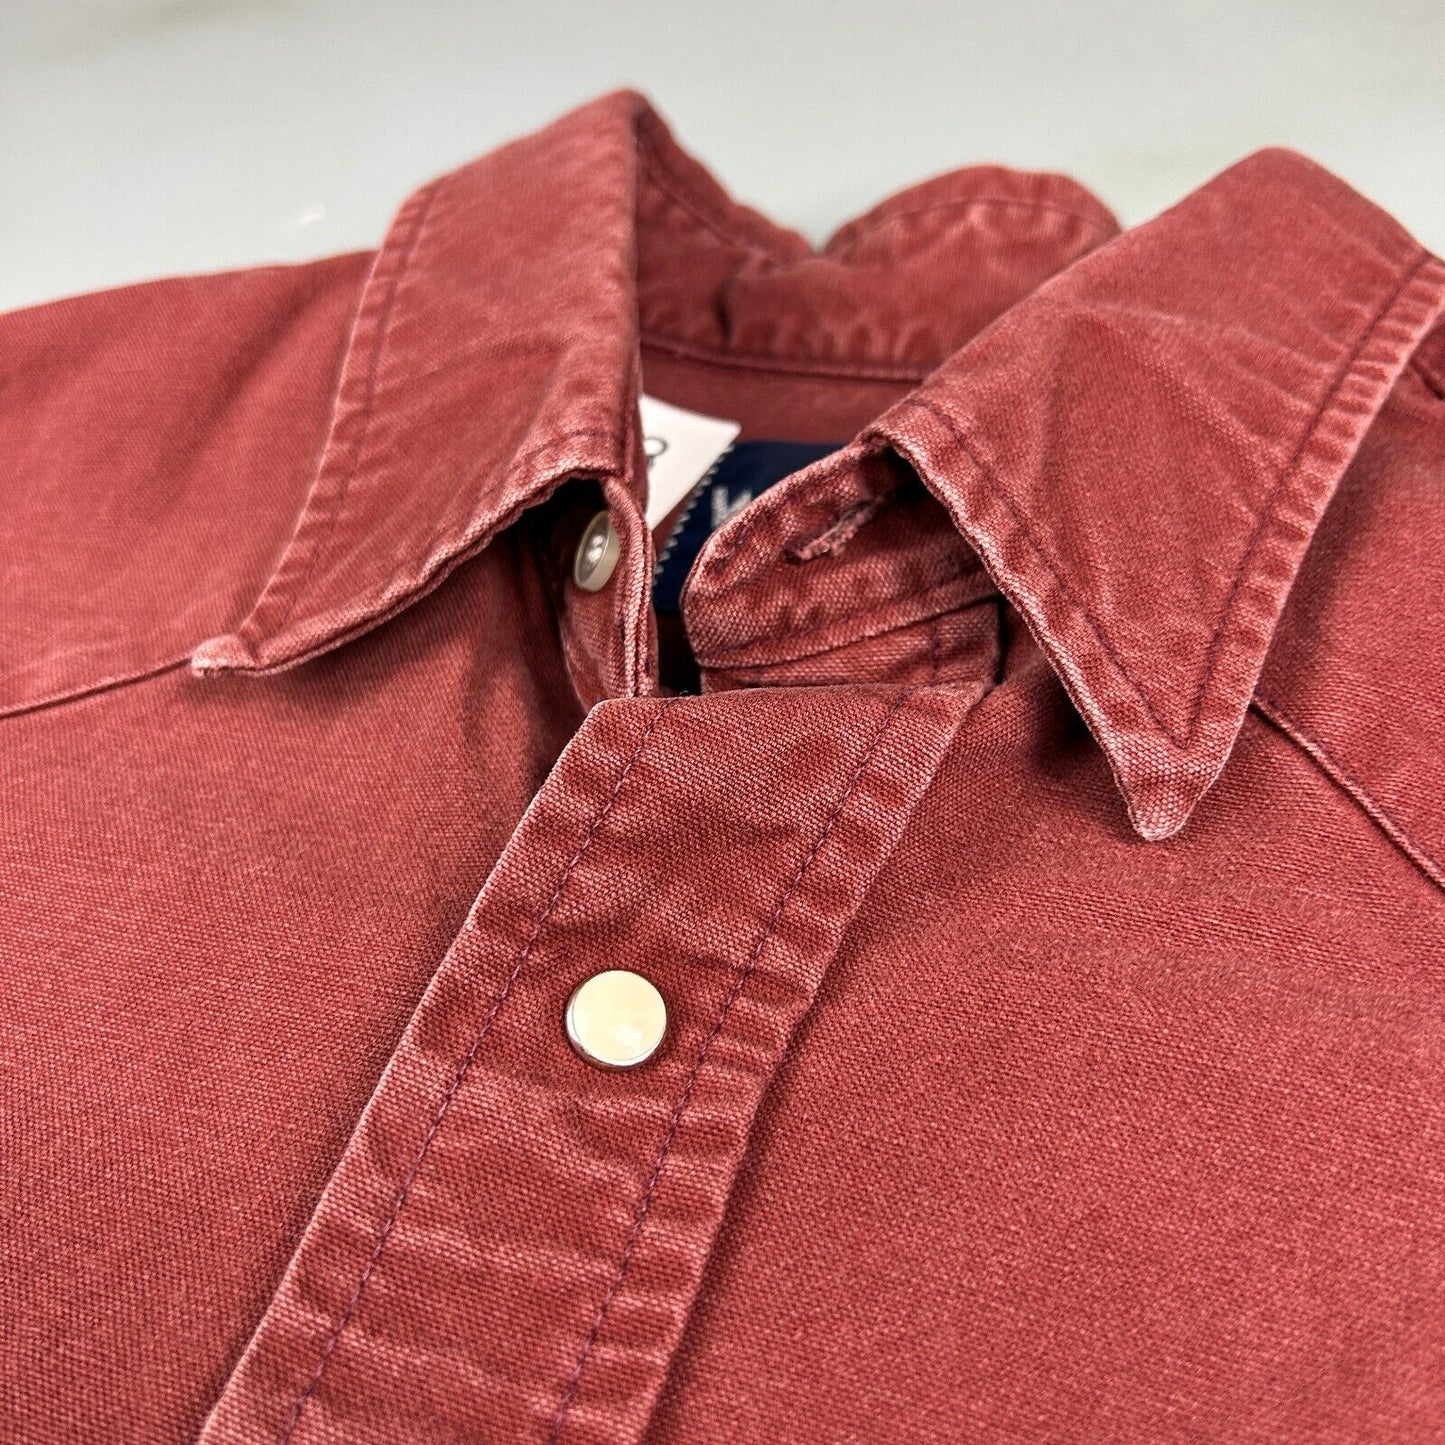 VINTAGE 90s Wrangler Red Pearl Snap Western Button Up Shirt sz L/XL Adult